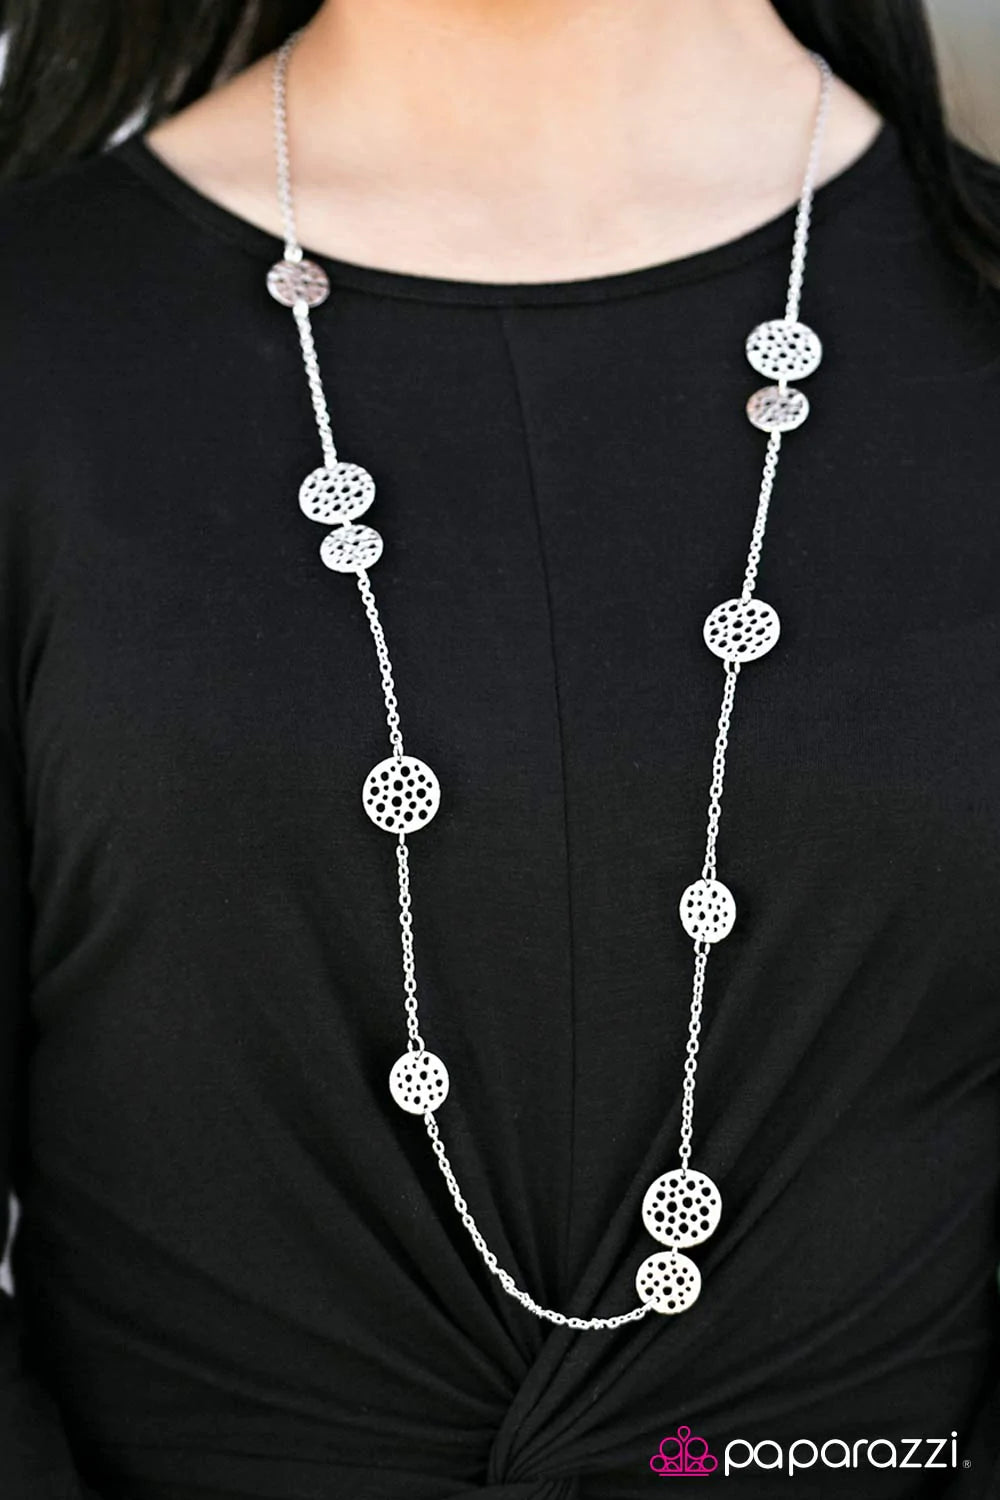 Paparazzi Necklace ~ The HOLEY Grail  - Silver